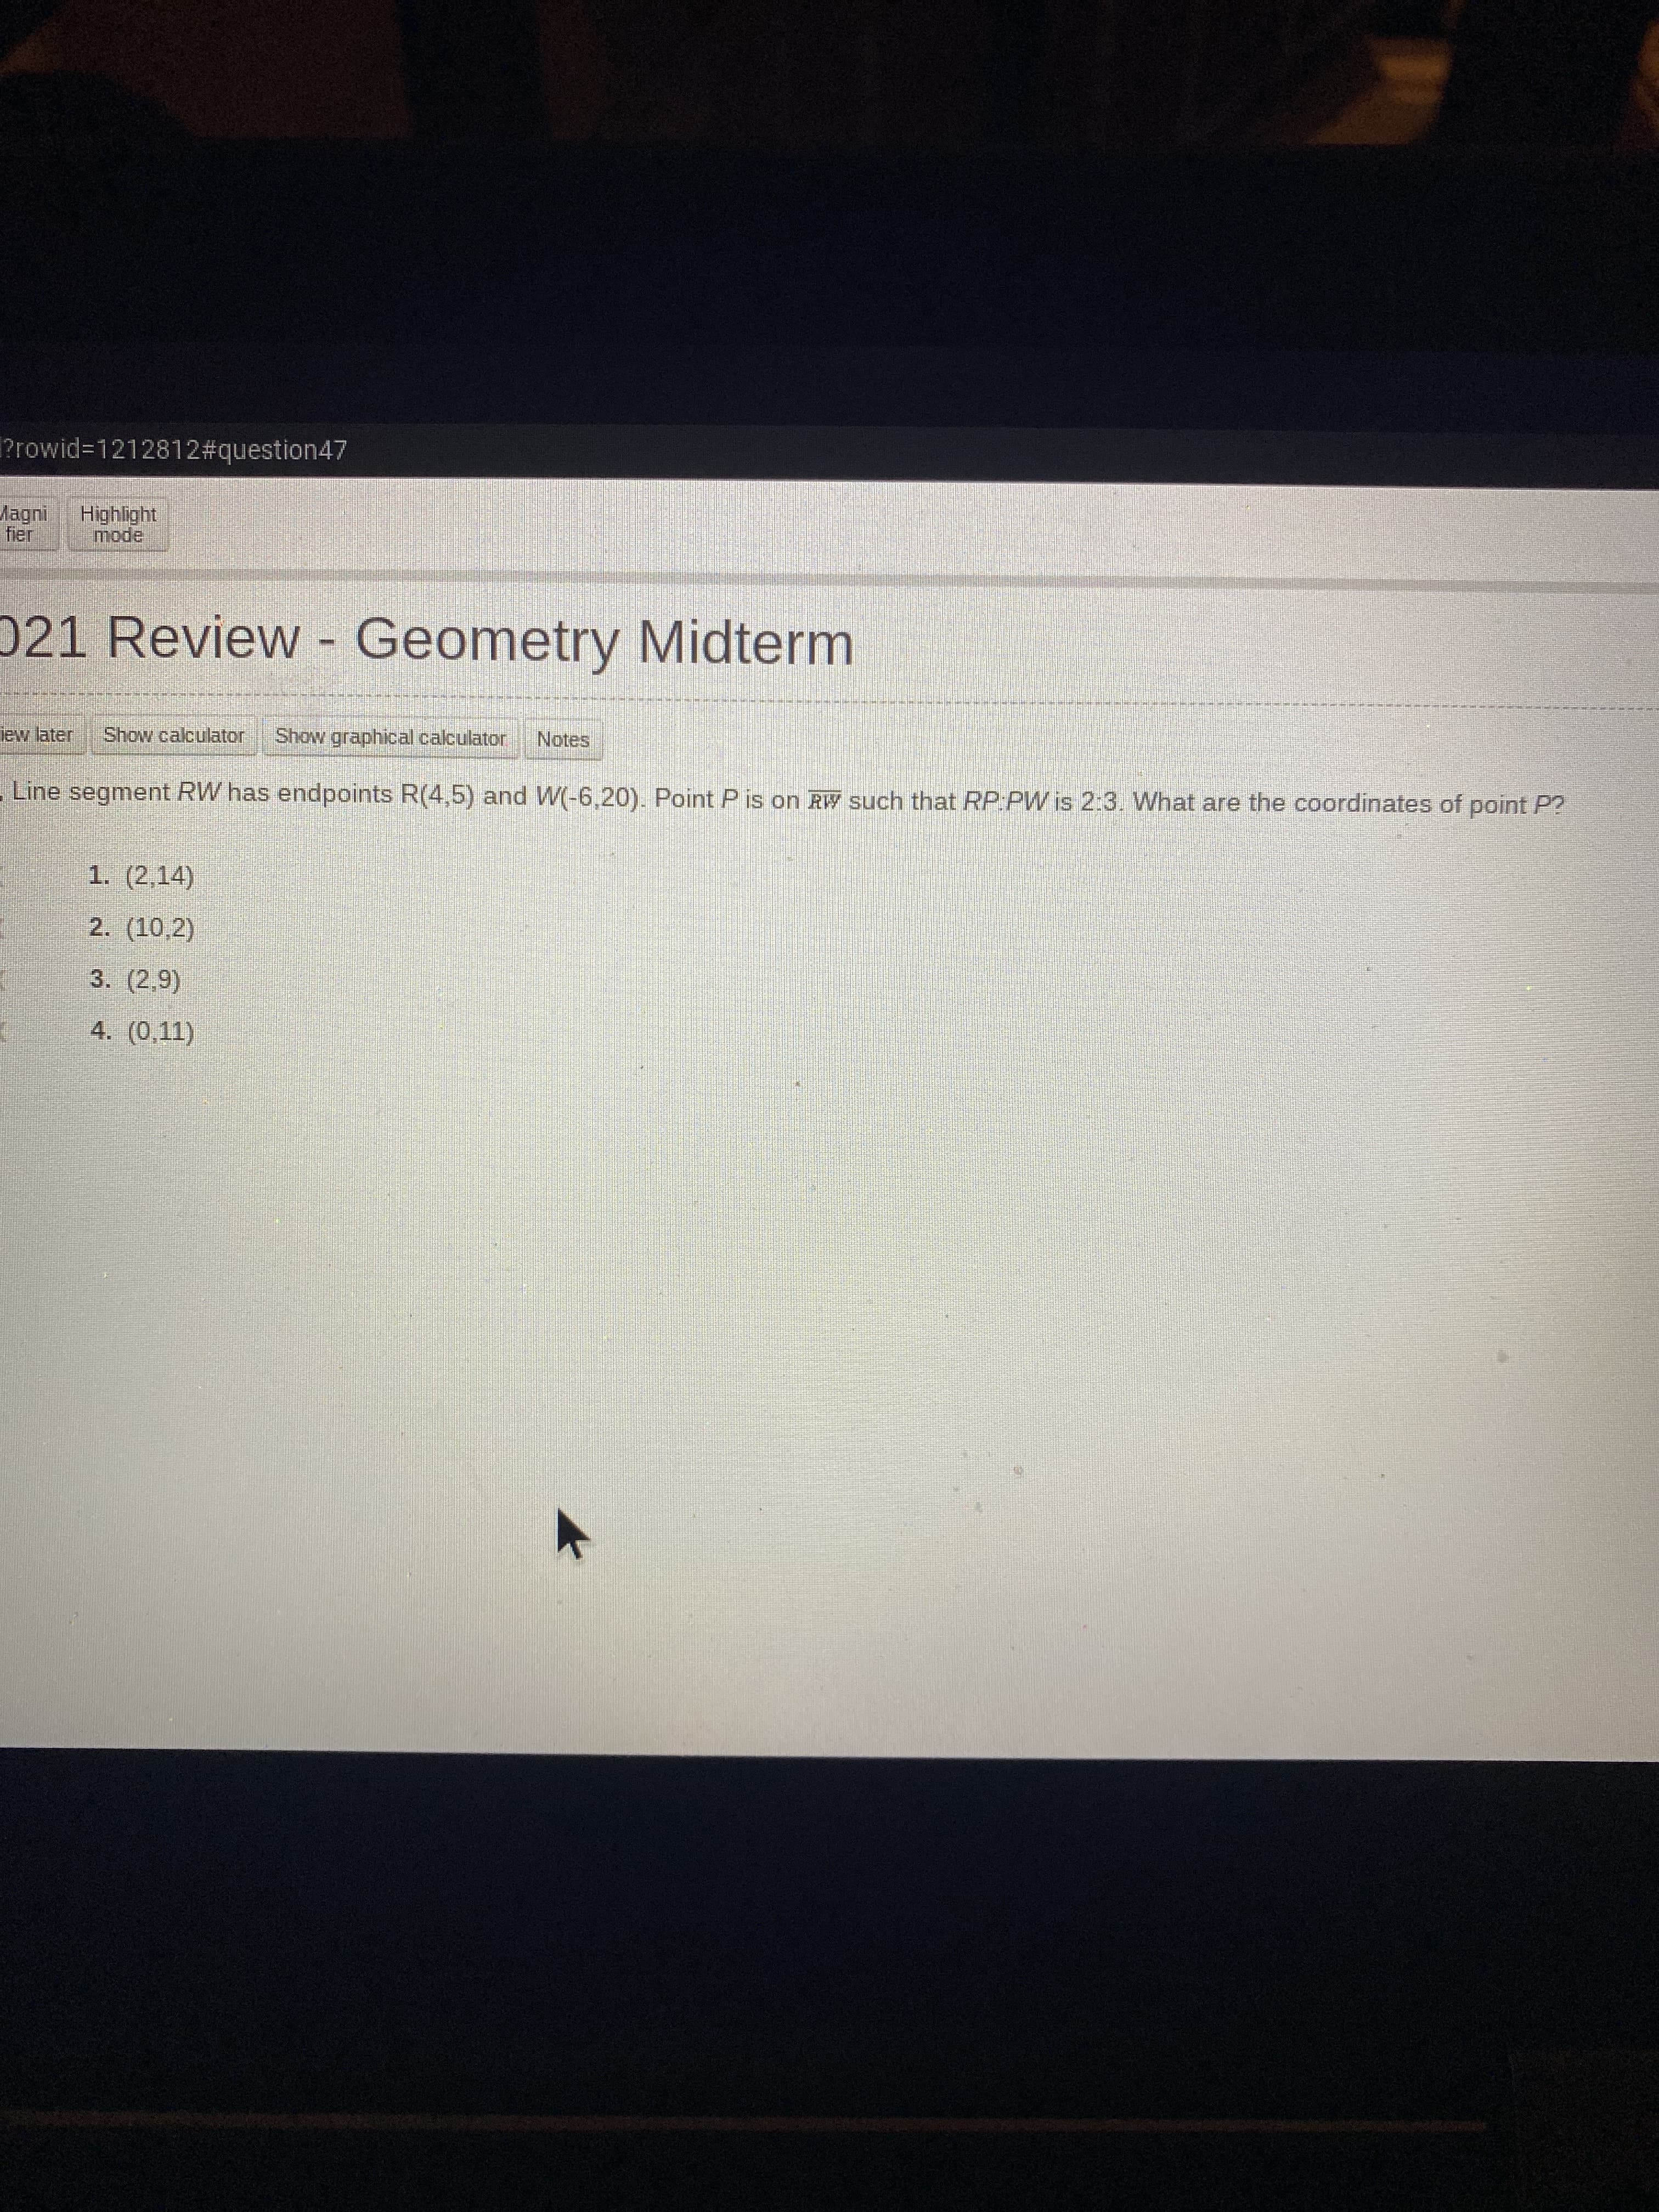 ?rowid%3D1212812#question47
Highlight
mode
fier
021 Review - Geometry Midterm
lew later
Show calculator
Show graphical calculator
Notes
Line segment RW has endpoints R(4,5) and W(-6,20). Point P is on RW such that RP:PW is 2:3. What are the coordinates of point P?
1. (2,14)
2. (10,2)
3. (2,9)
4. (0,11)
